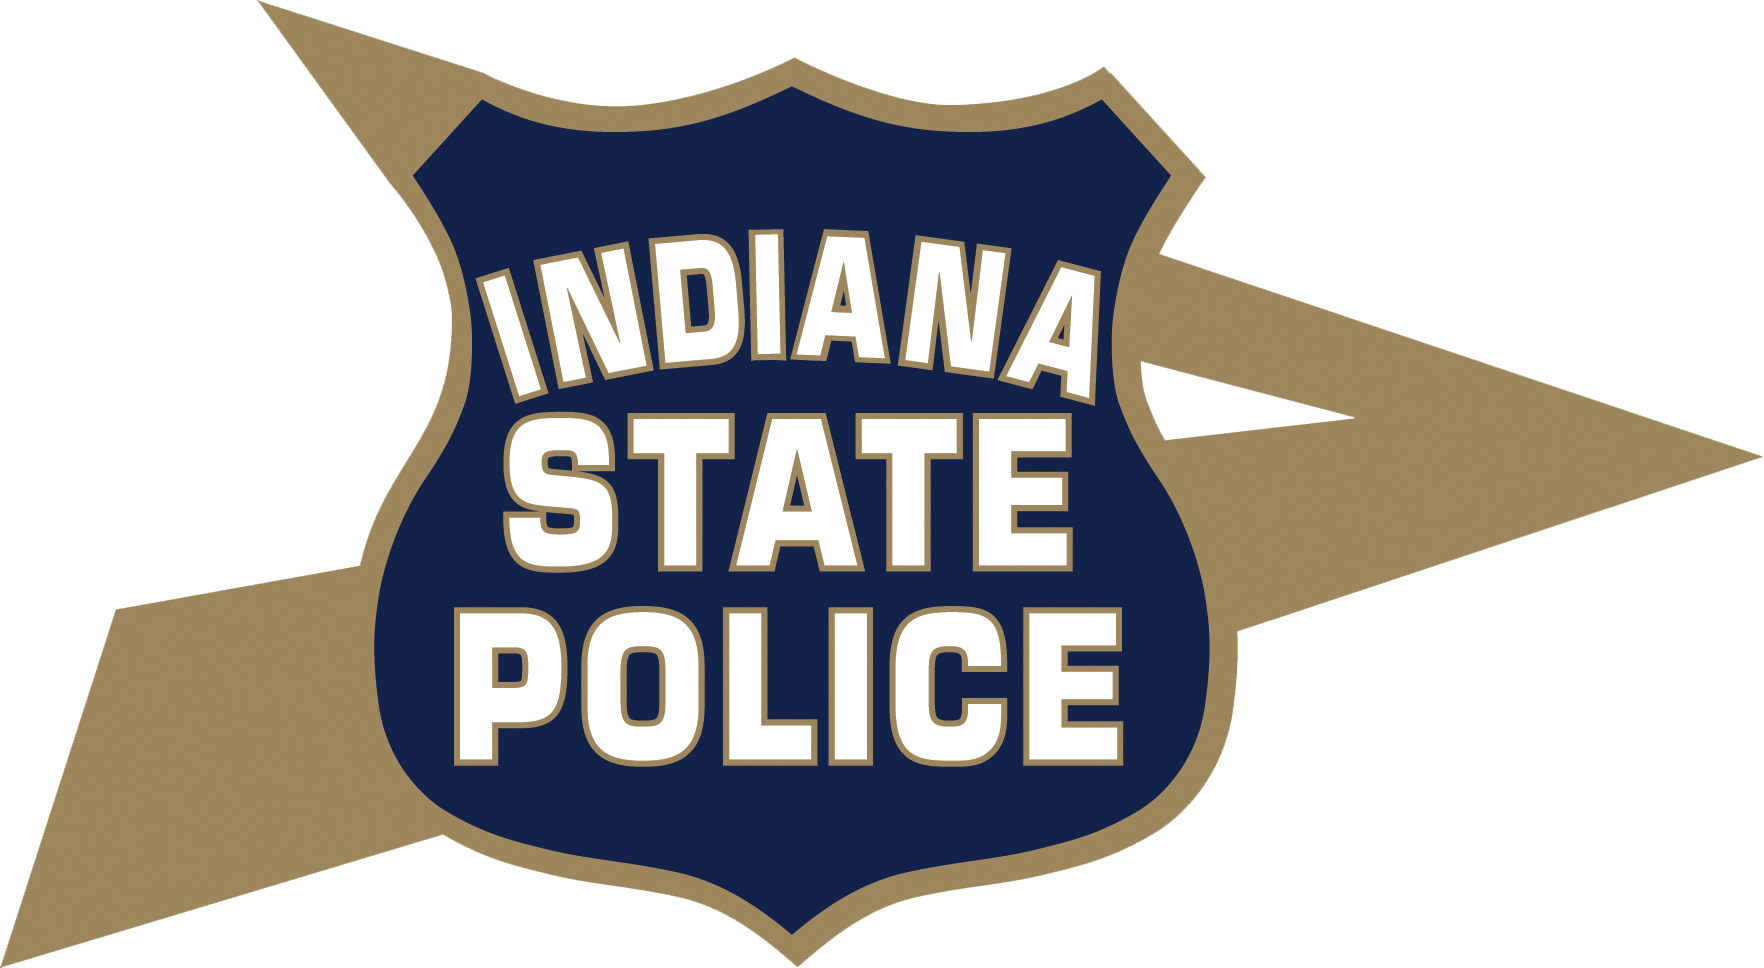 Indiana State Police Decal (1764x968)